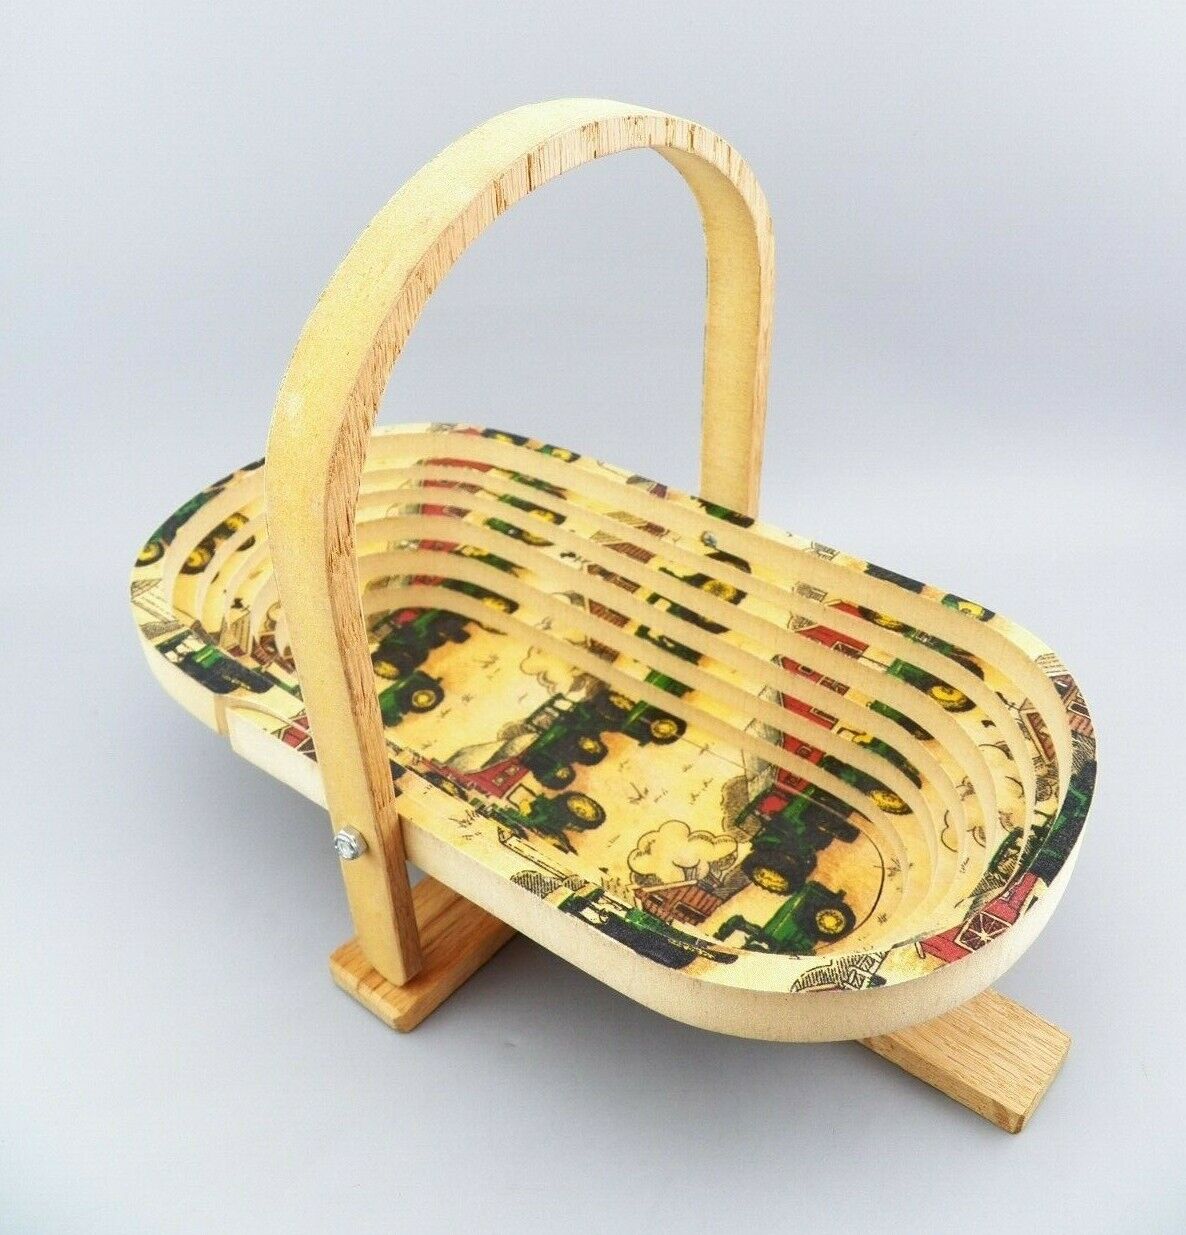 VTG Collapsible Wooden Basket JOHN DEERE TRACTORS Handmade by Traditions Unique